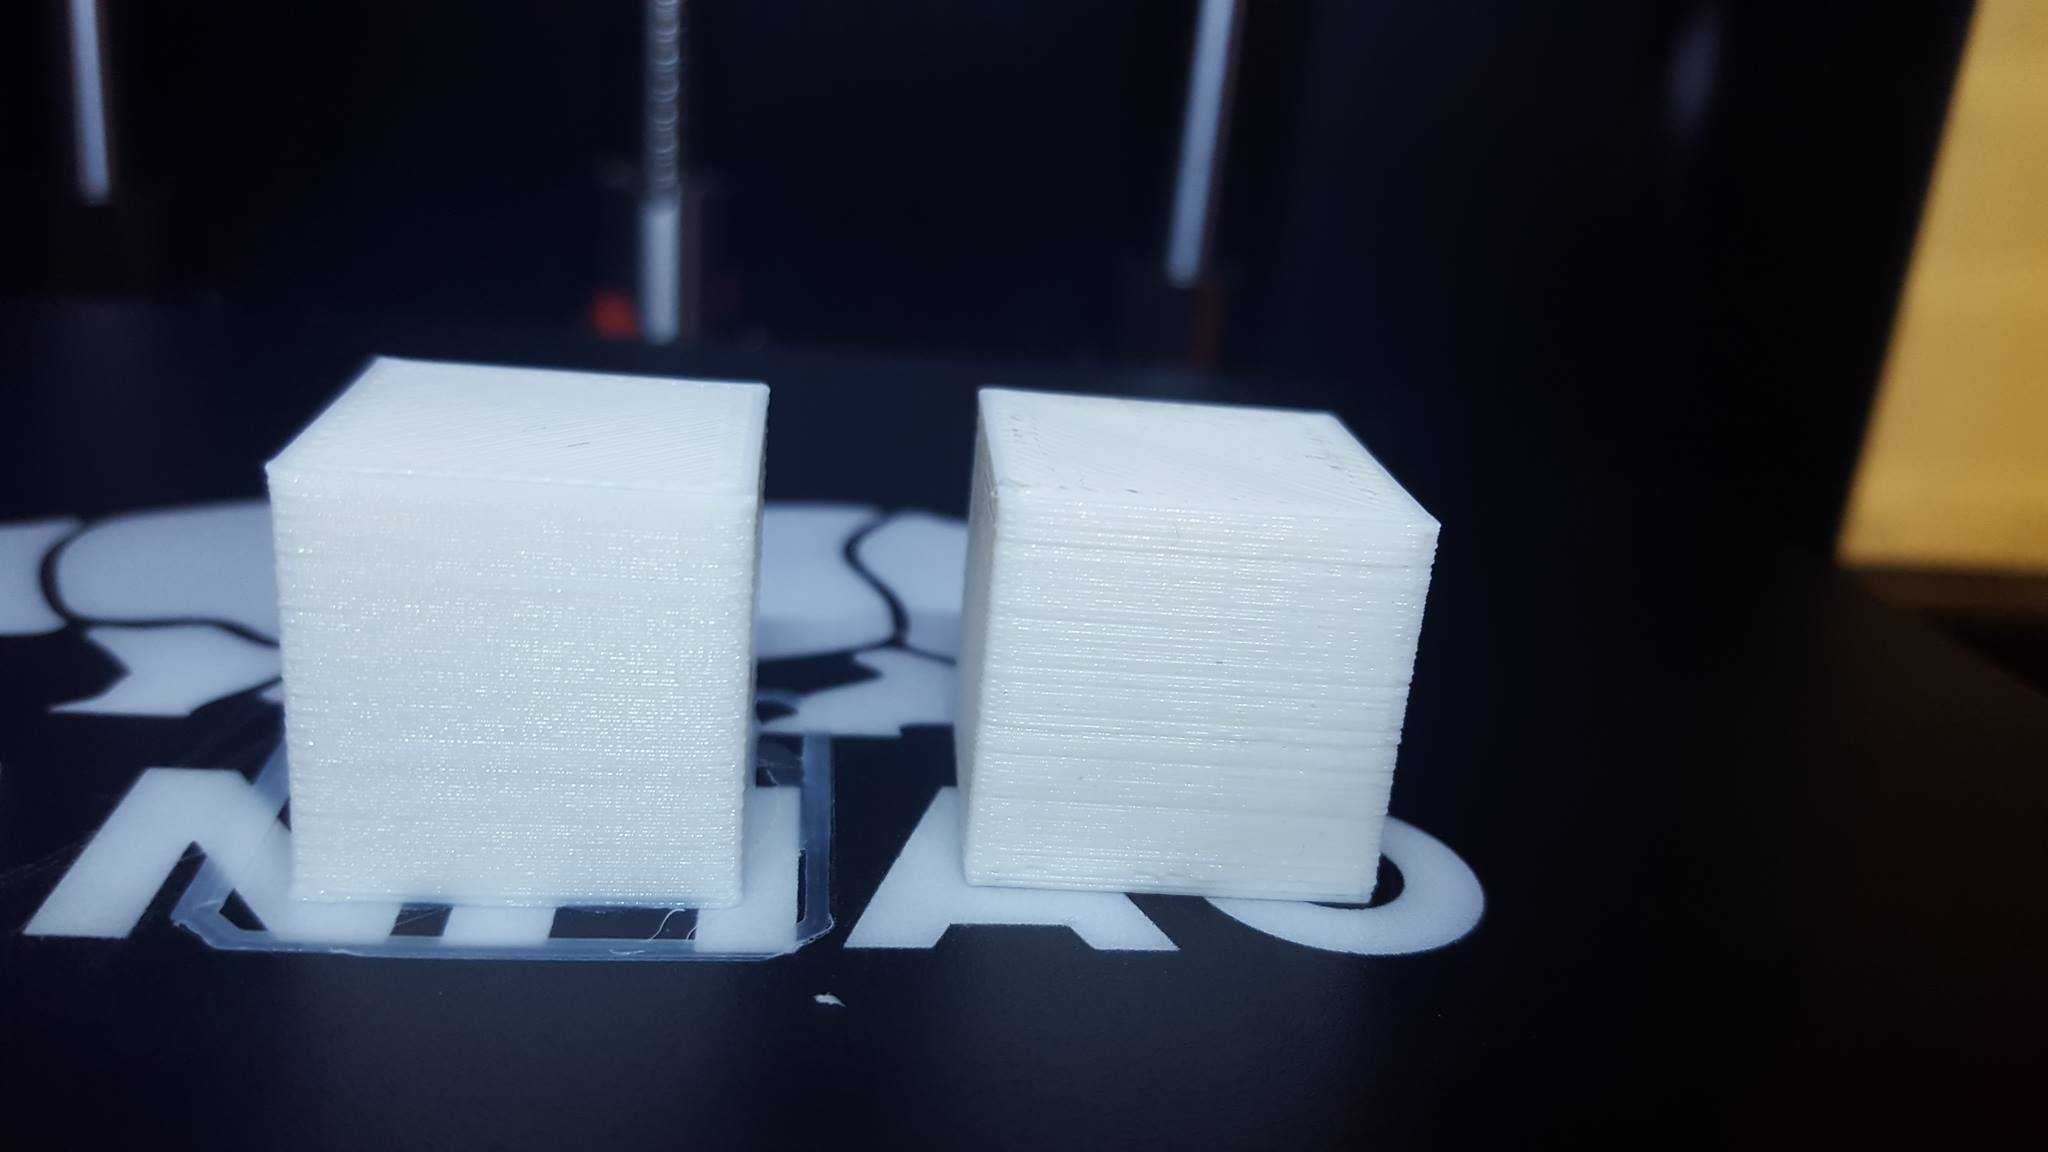 Petg vs pla: what are the differences?